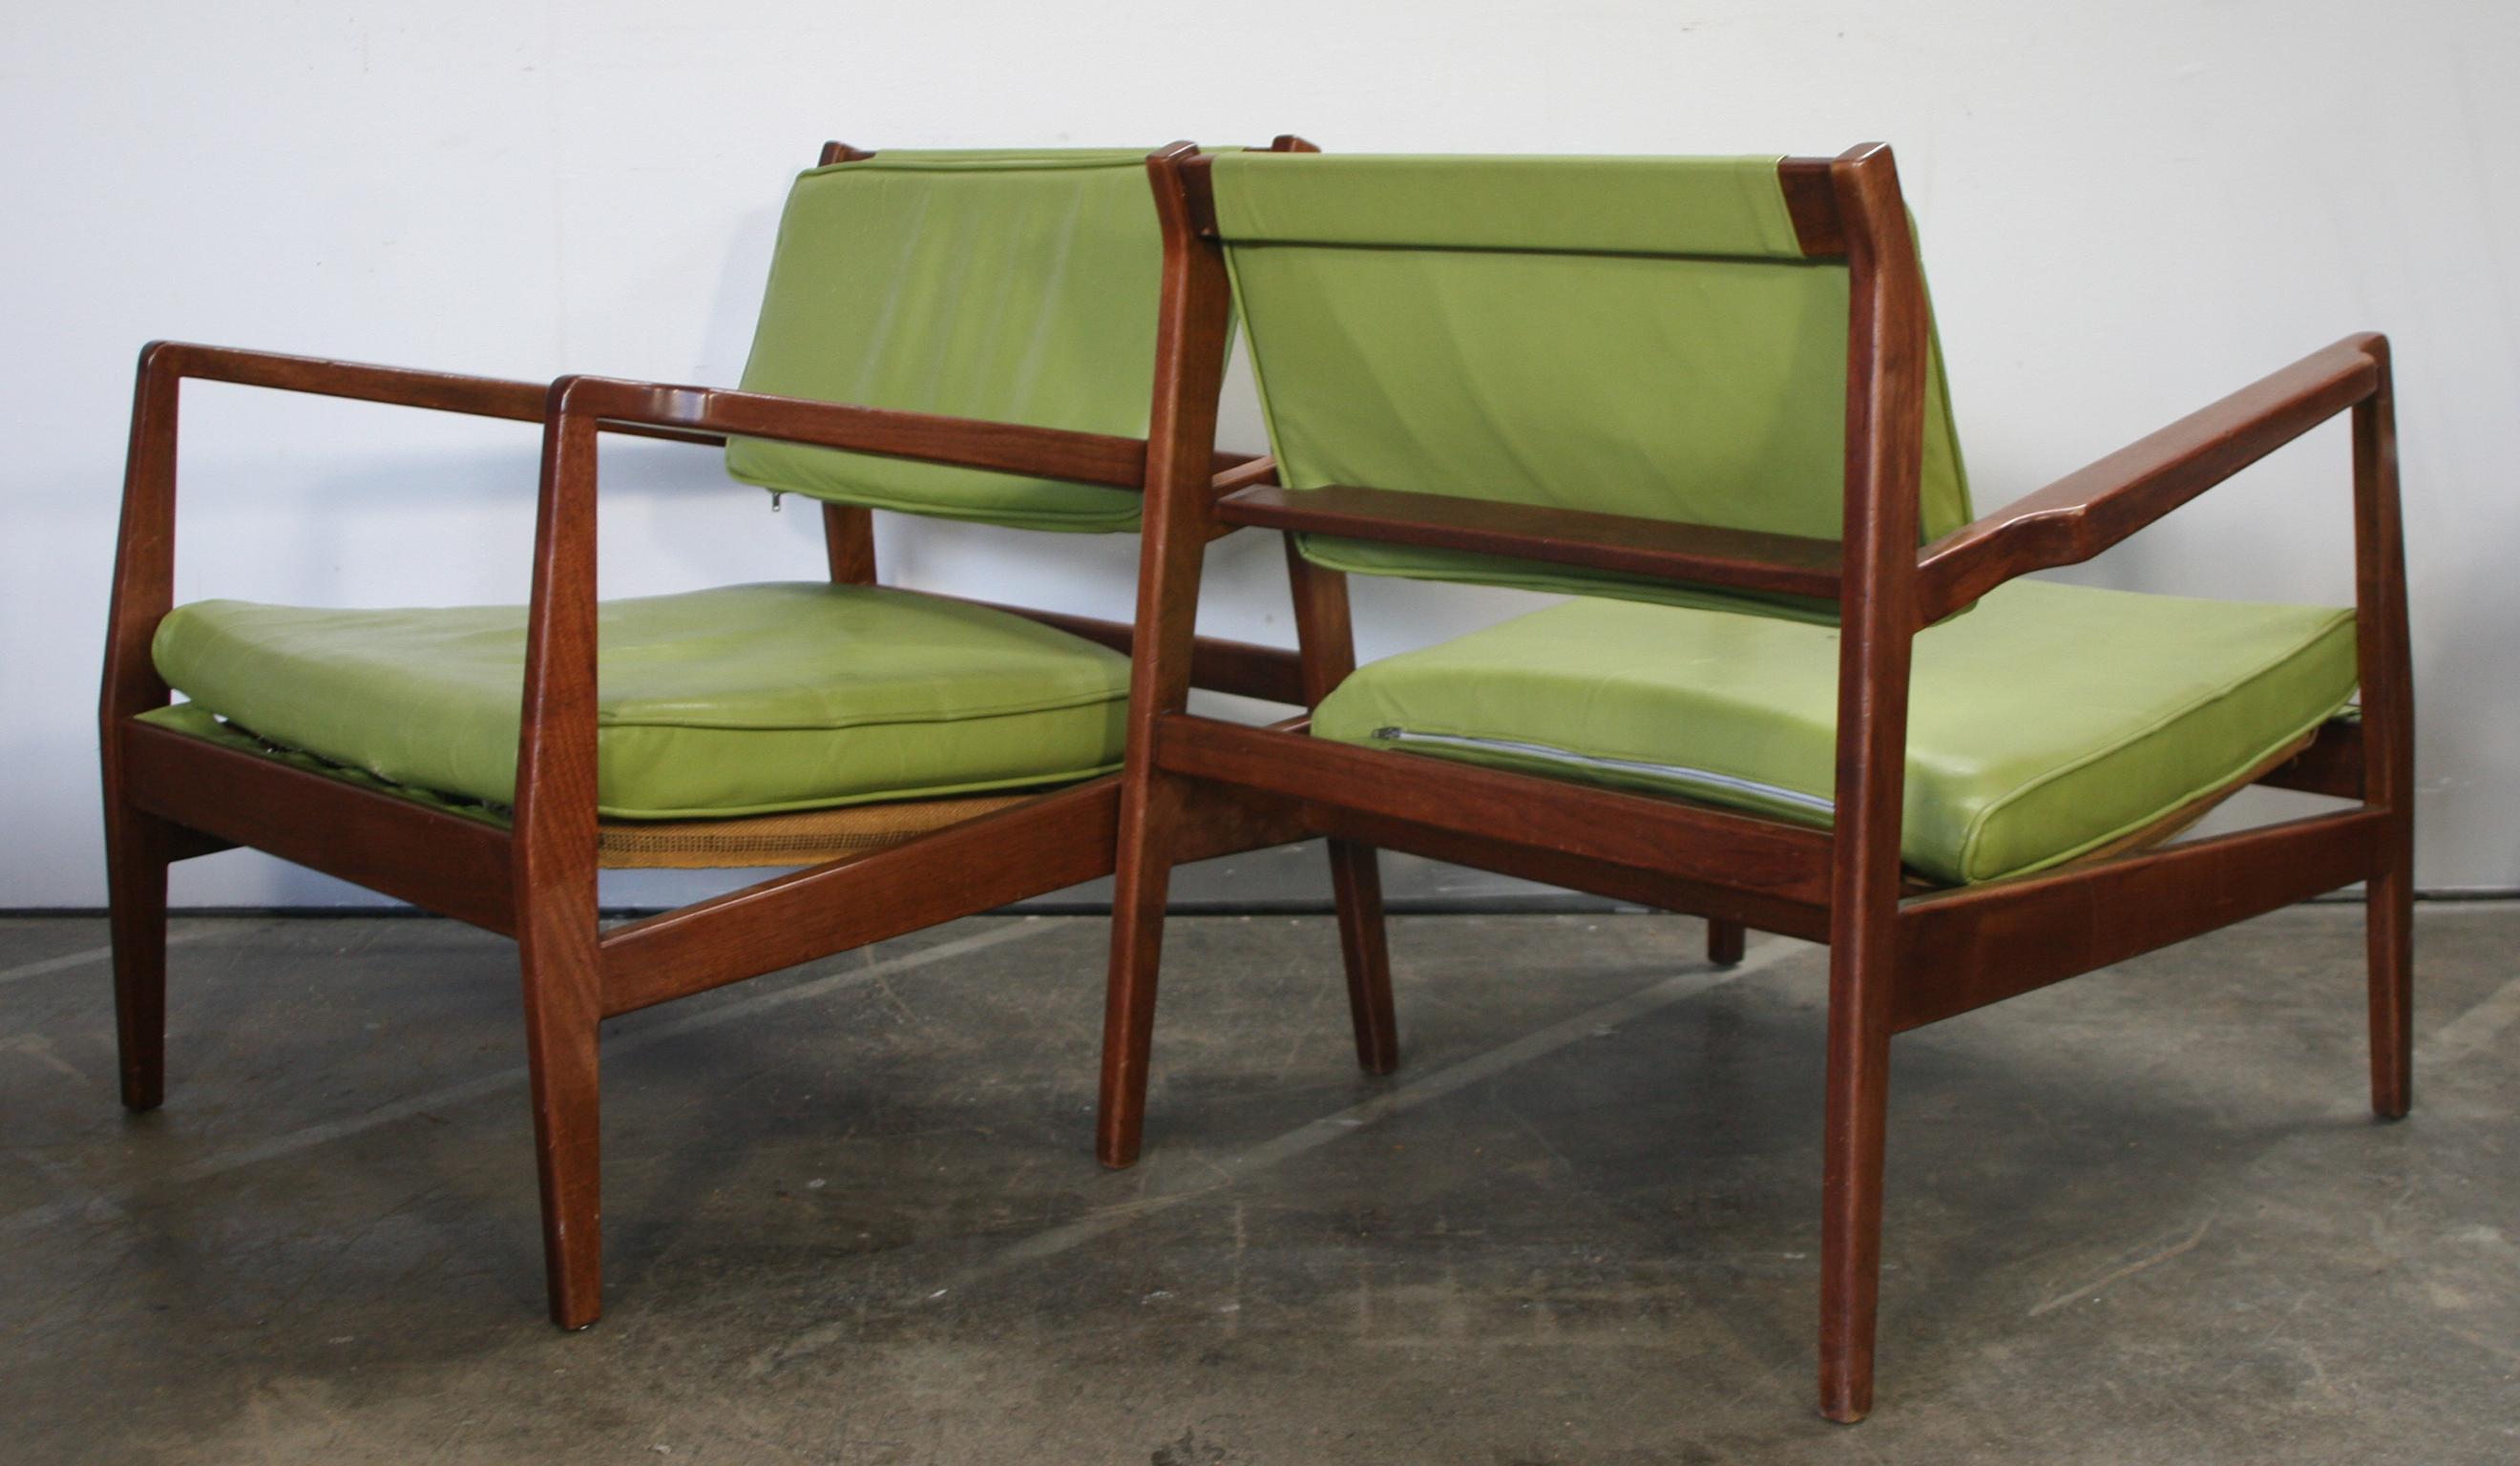 Pair of Rare Midcentury Jens Risom U 460 Low Lounge Chairs Green Leather 1